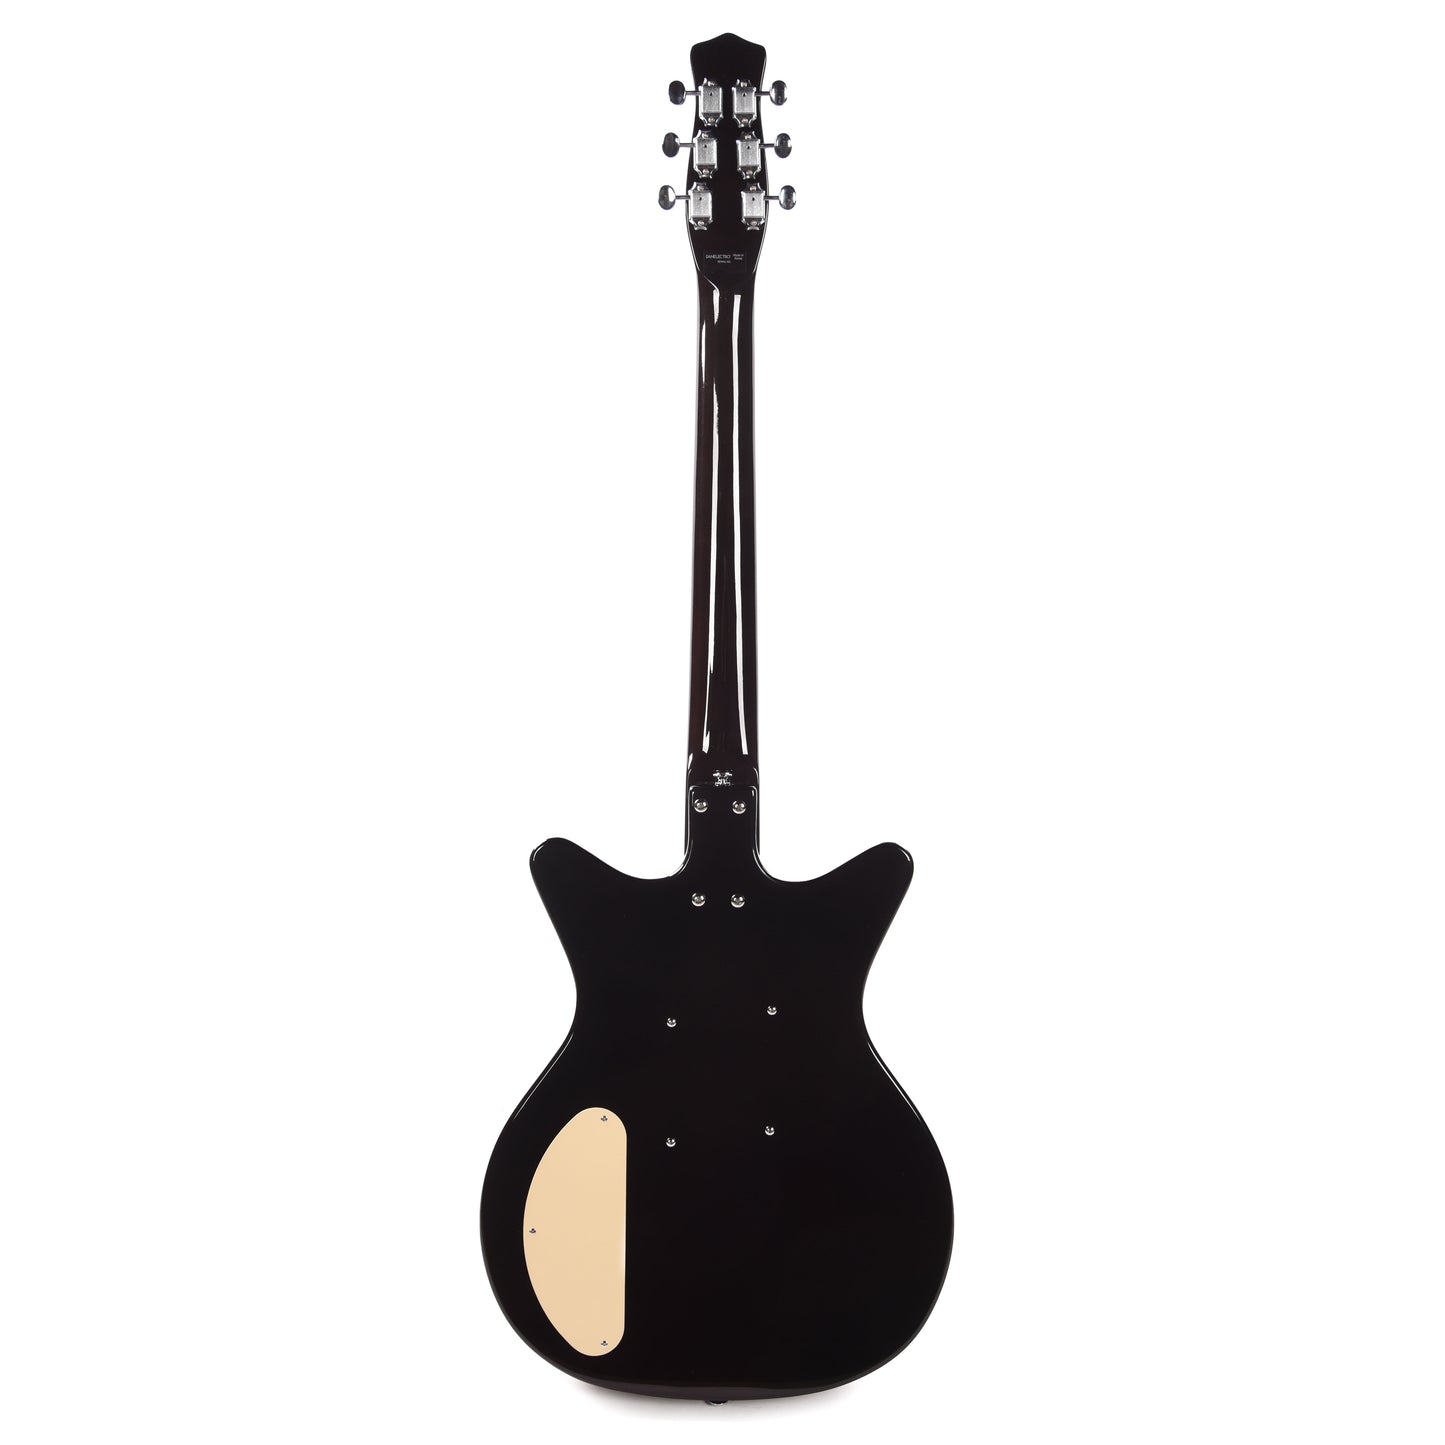 Danelectro Fifty Niner Gold Top